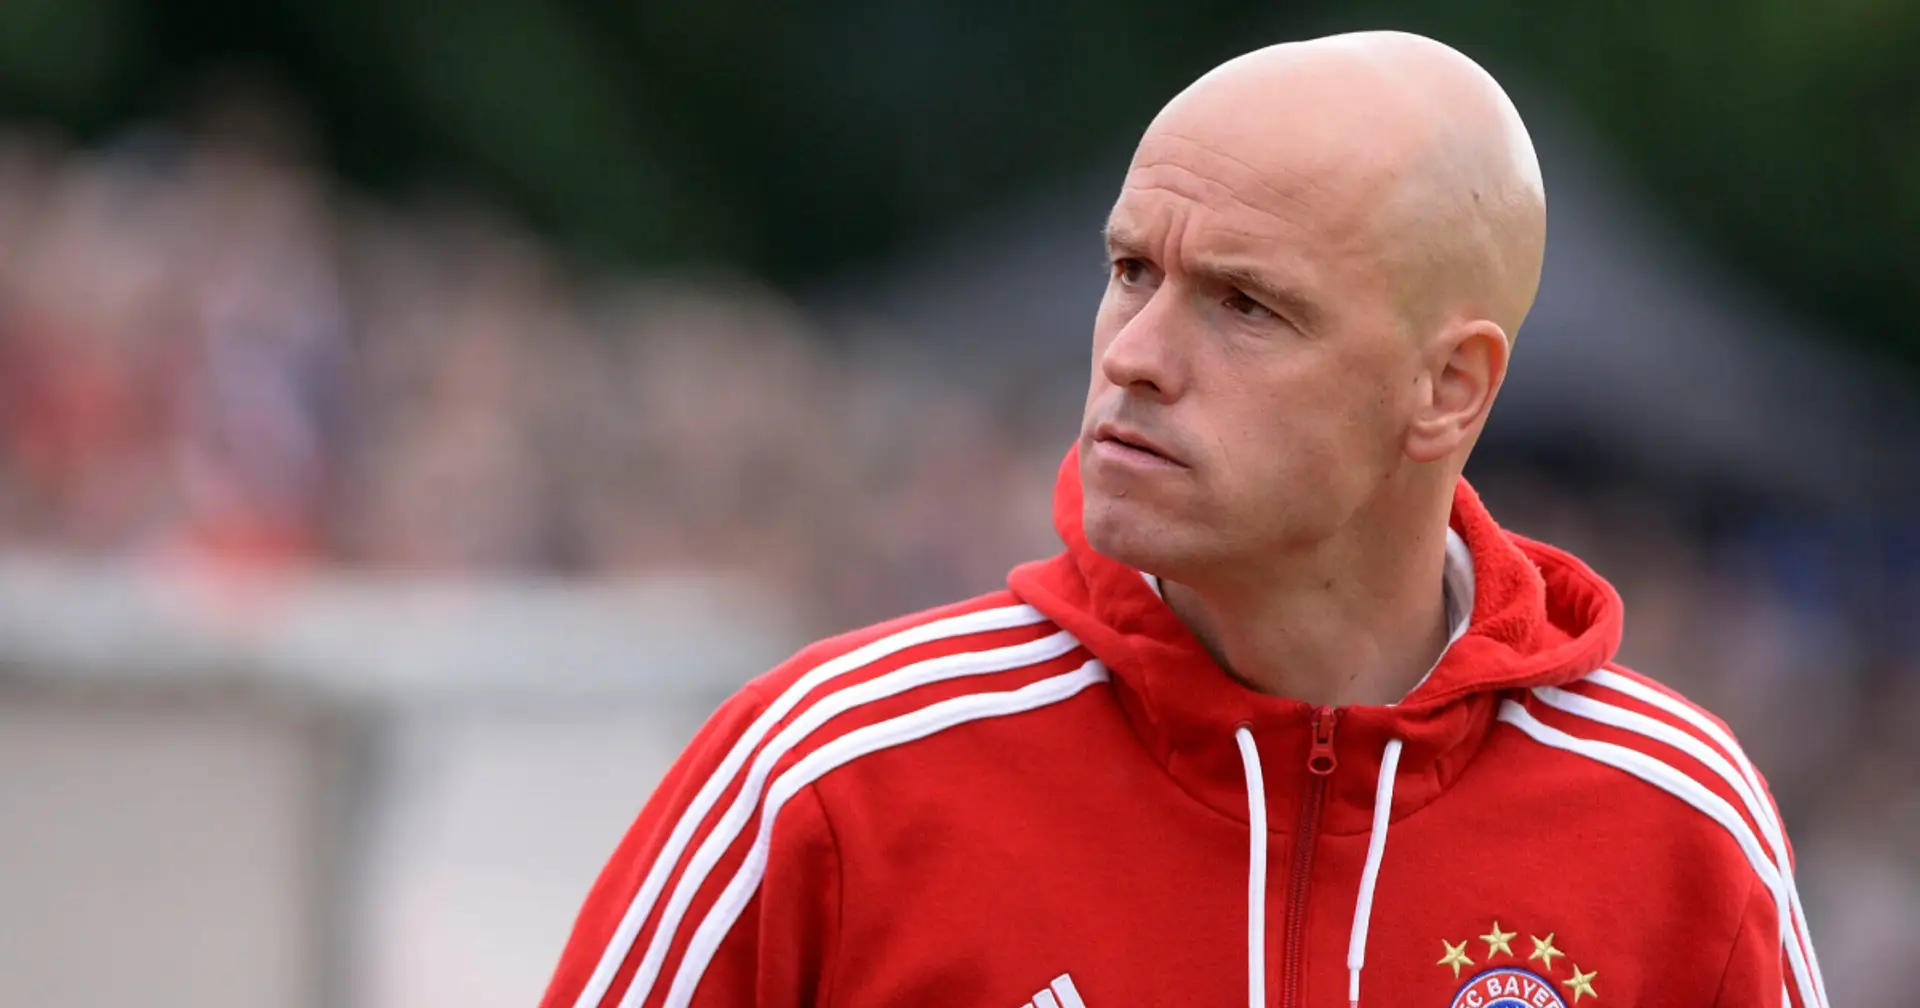 Erik ten Hag 'being discussed' as potential Bayern manager (reliability: 4 stars)